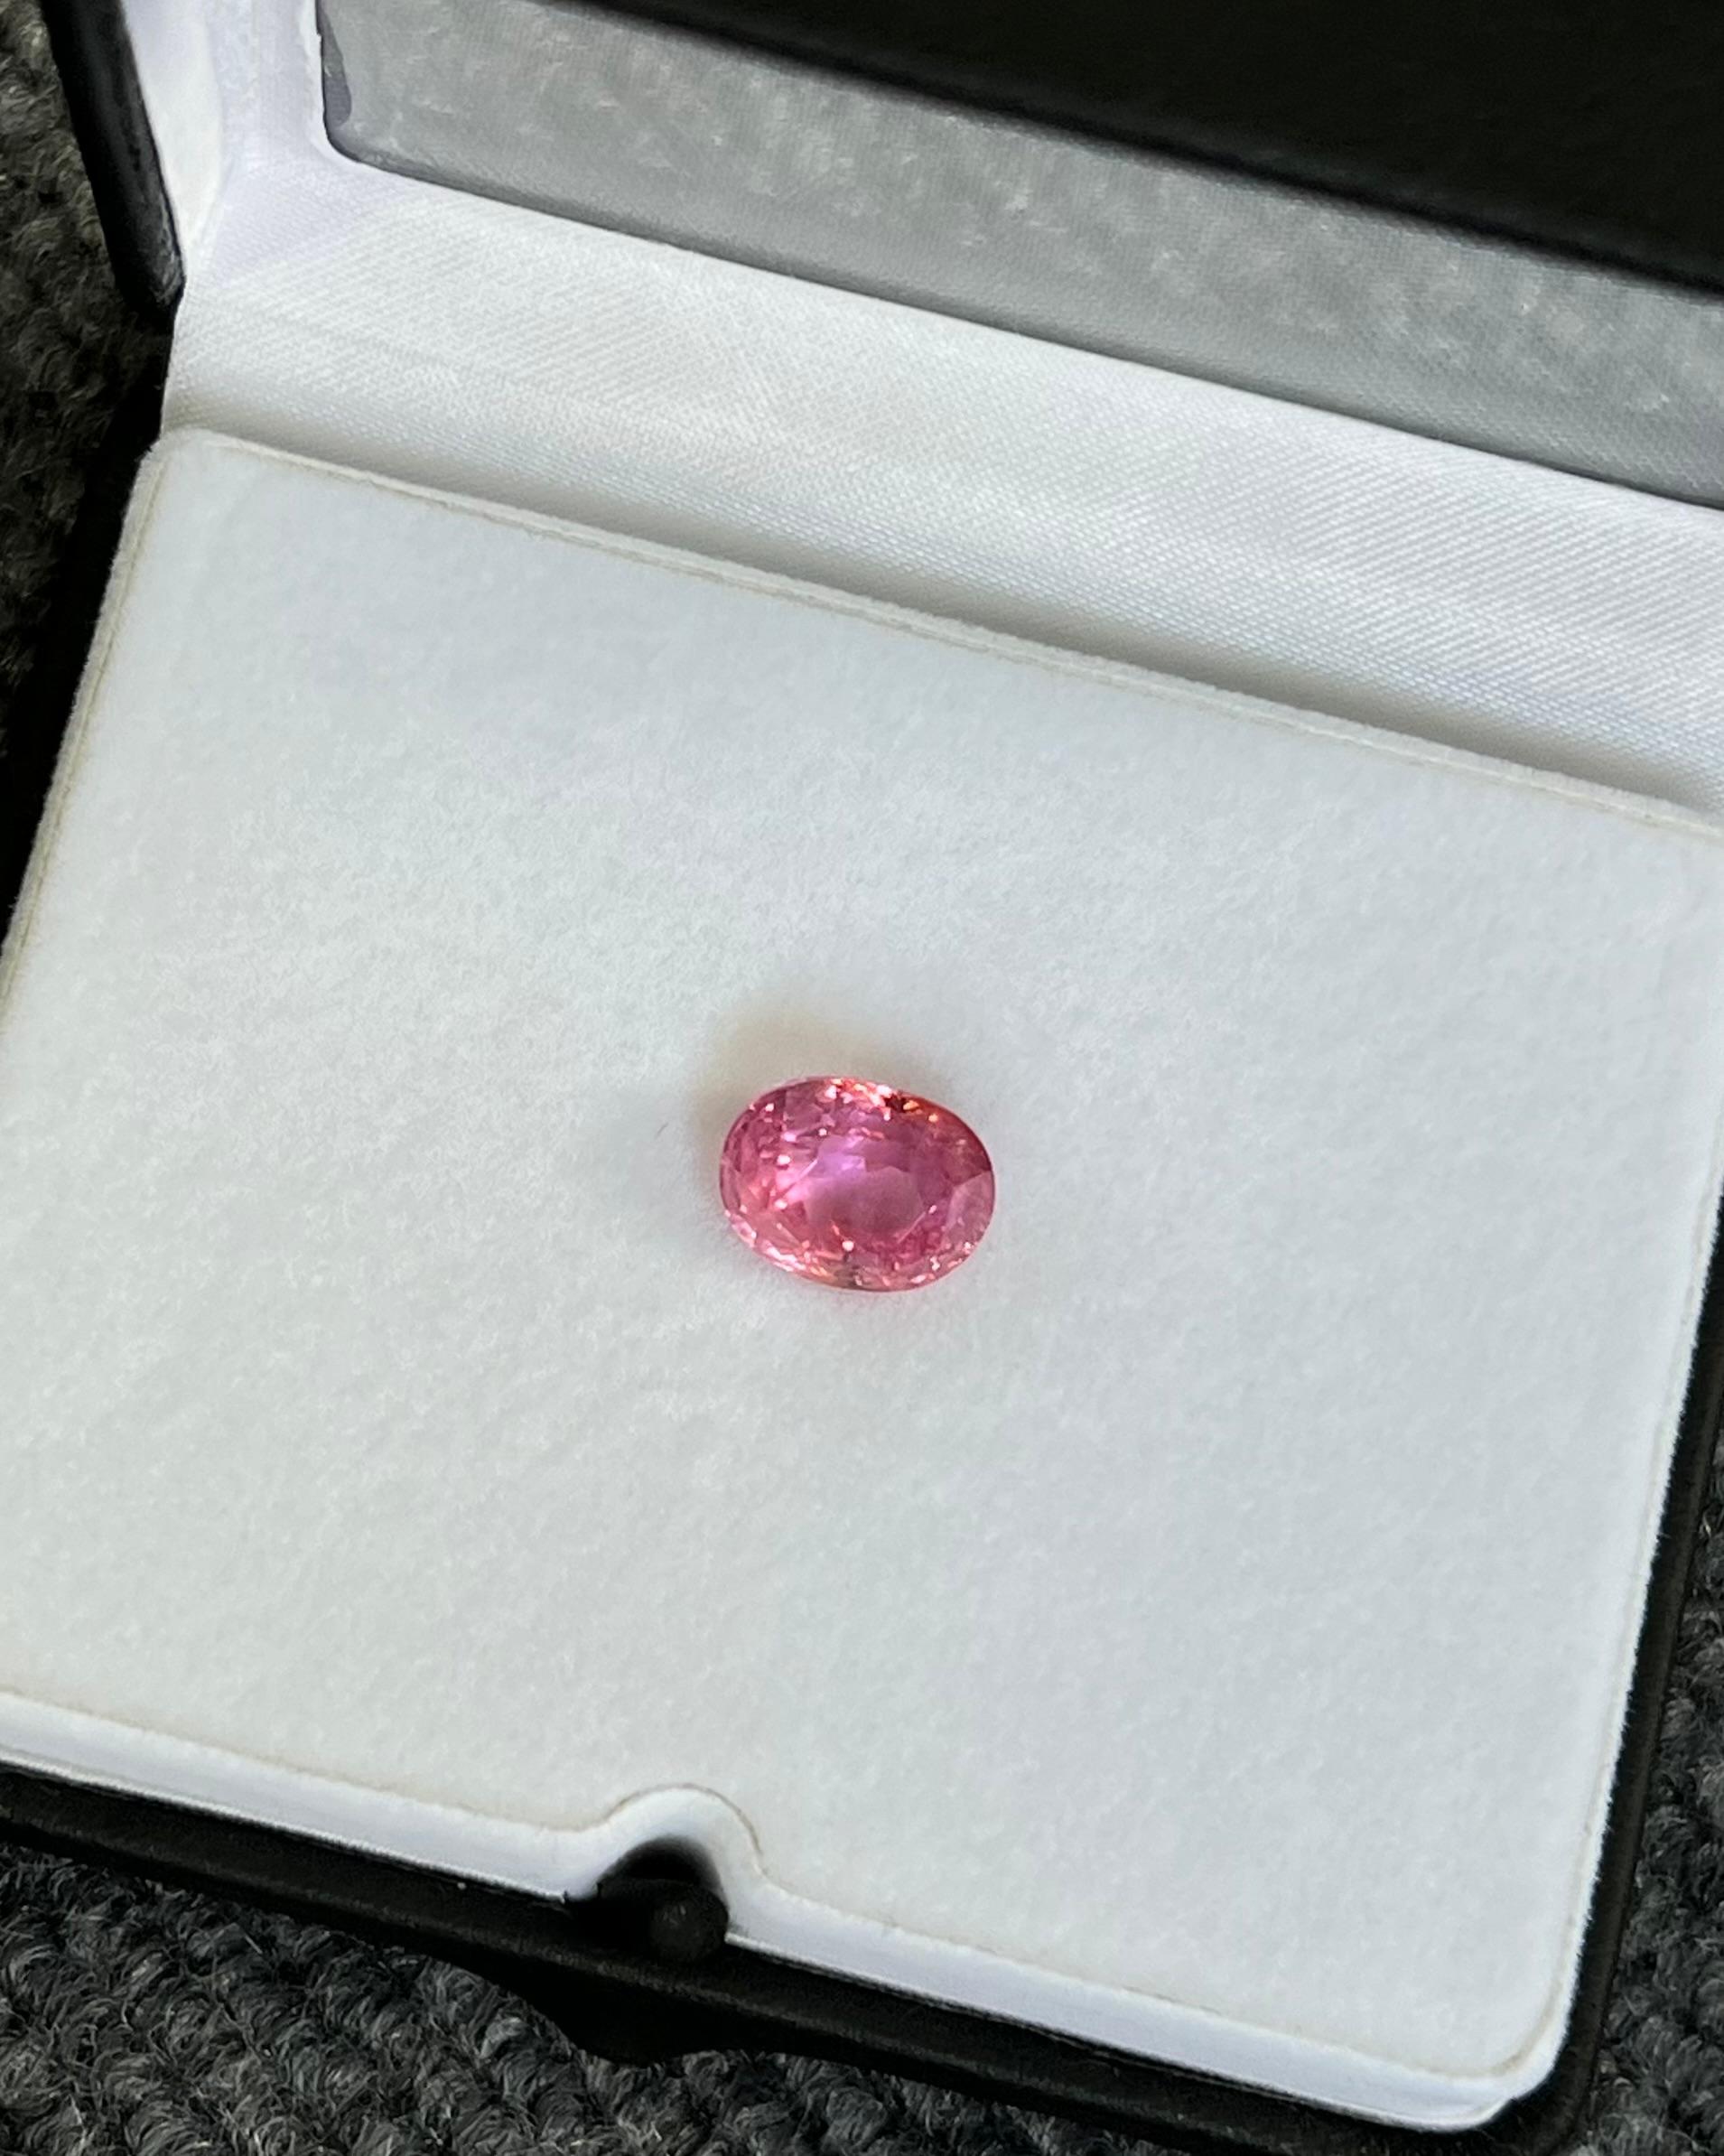 This stunning 8.25 carat natural, non-heated padparadscha sapphire showcases a captivating blend of pink and orange hues. This exquisite gemstone originates from Sri Lanka renowned for being the home of the most exceptional padparadscha sapphires.